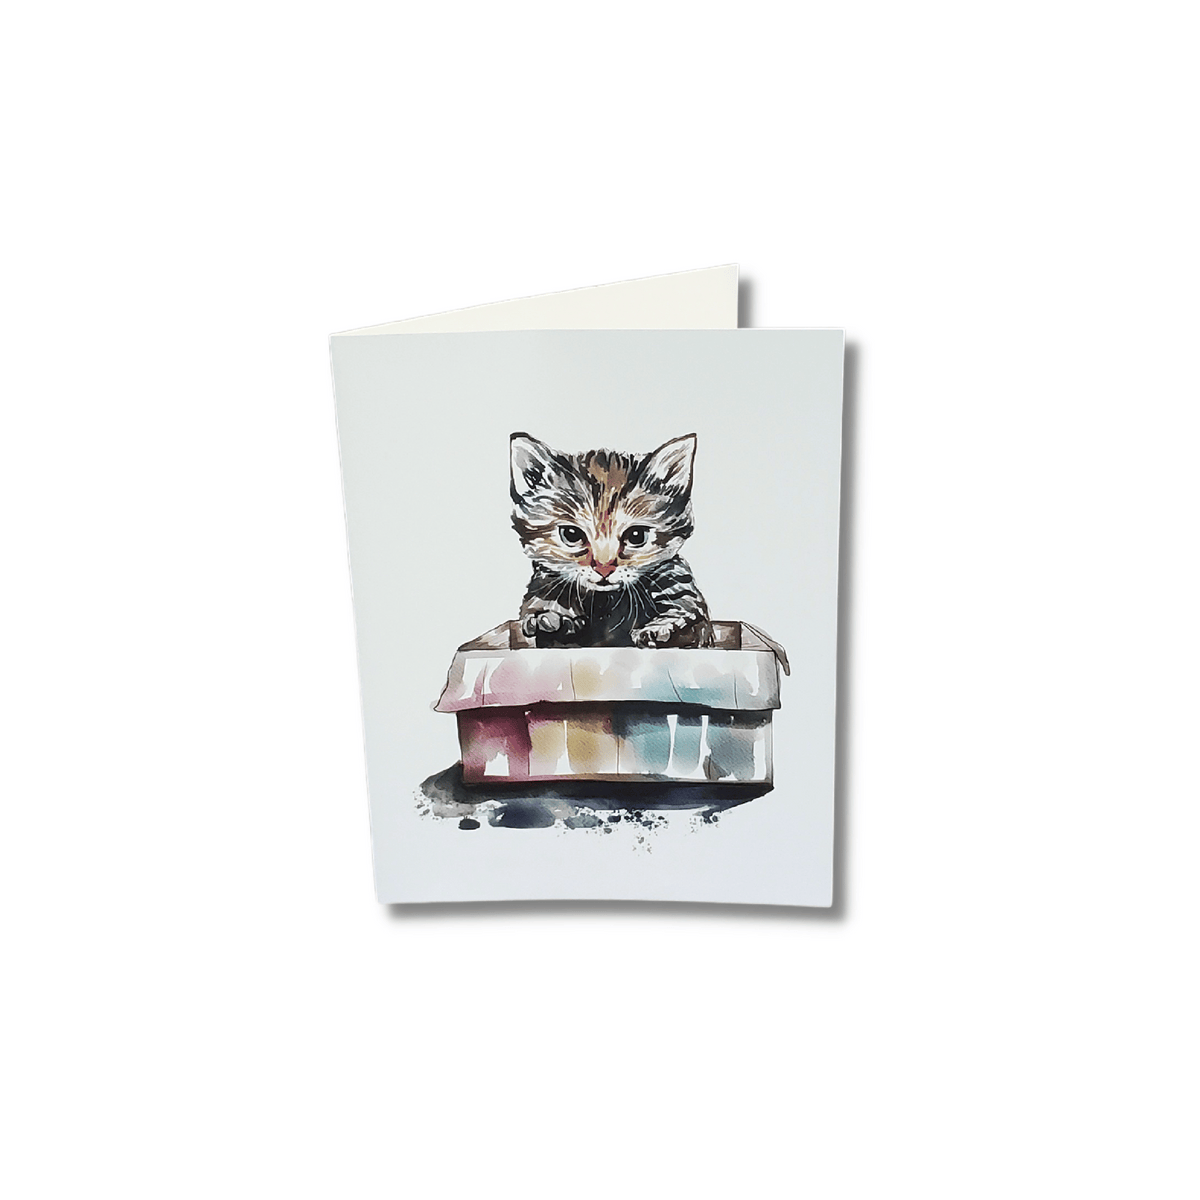 New cat card adoption and gotcha days for pet parent with personalized message option and decal